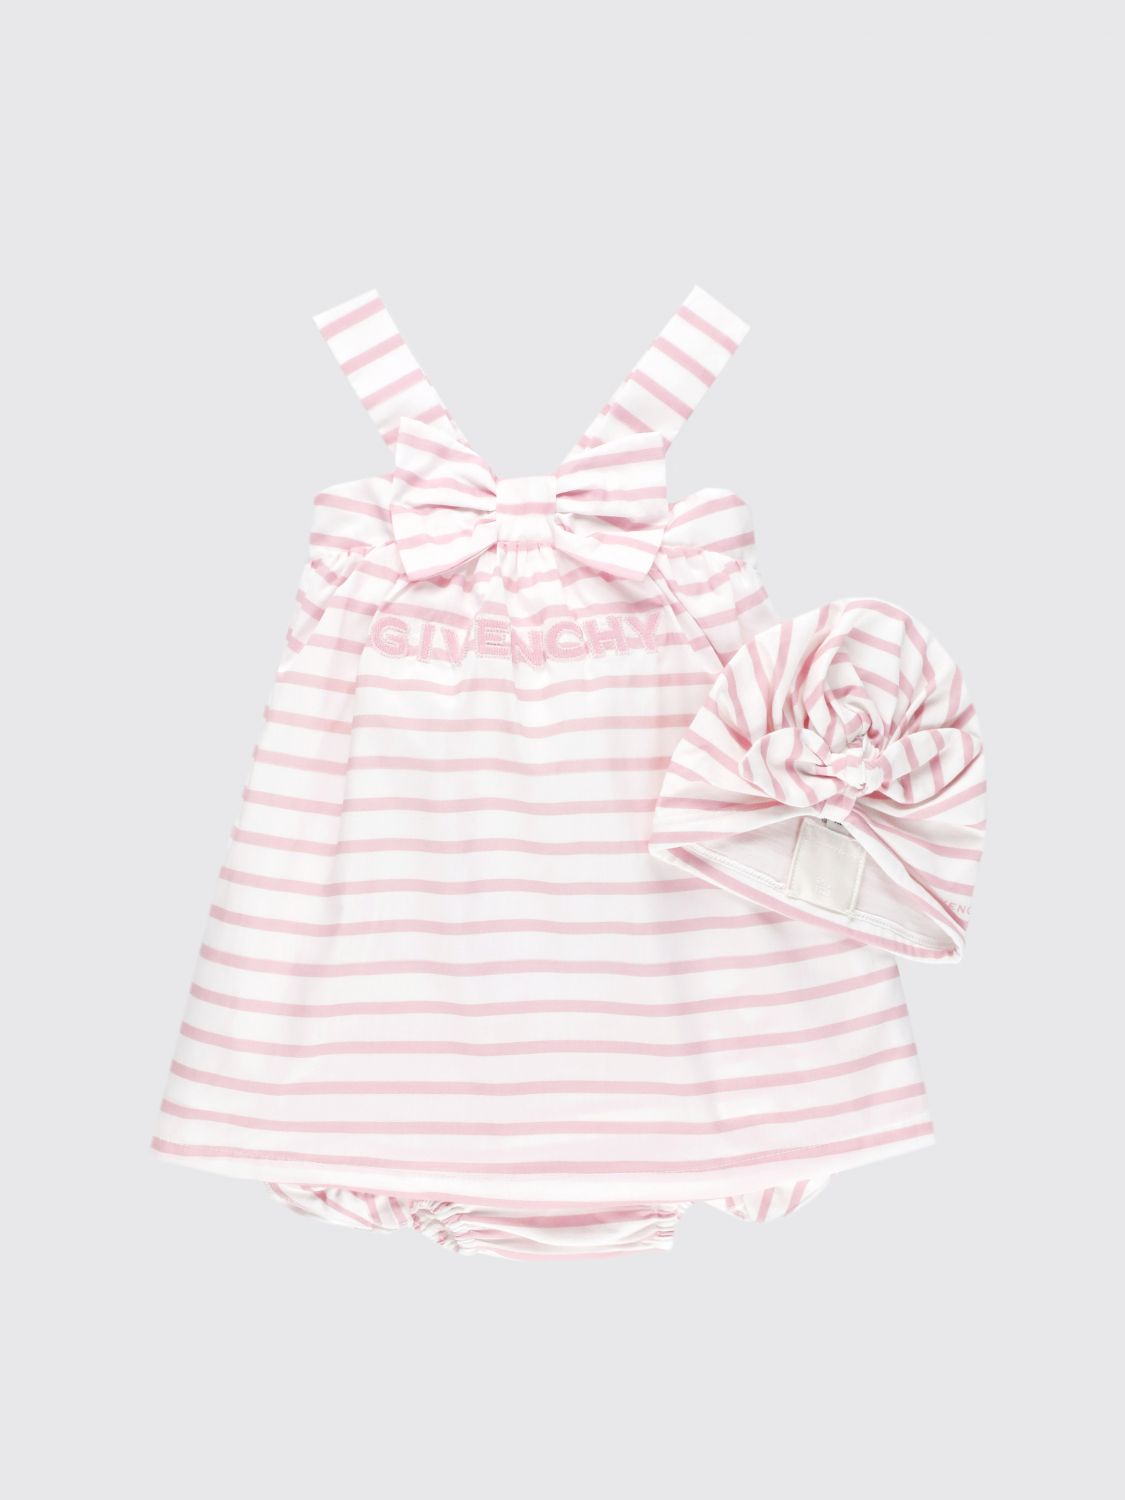 Givenchy Pack GIVENCHY Kids color Pink